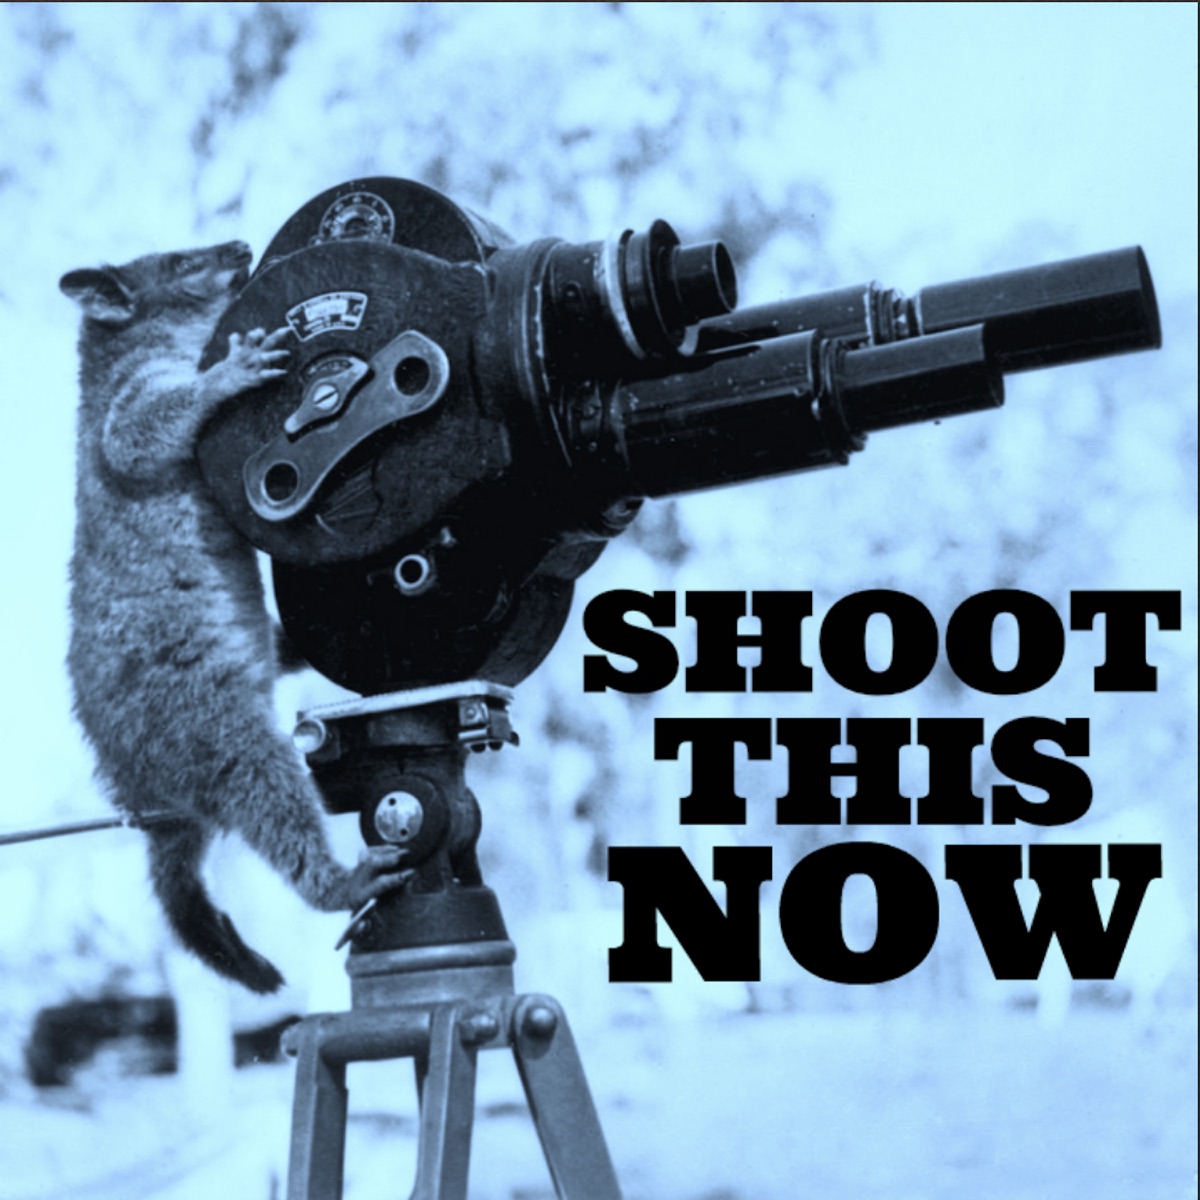 Fantastic Nudist - The Barry Rothbart Nudist Videographer Story â€“ Shoot This Now â€“ Podcast â€“  Podtail